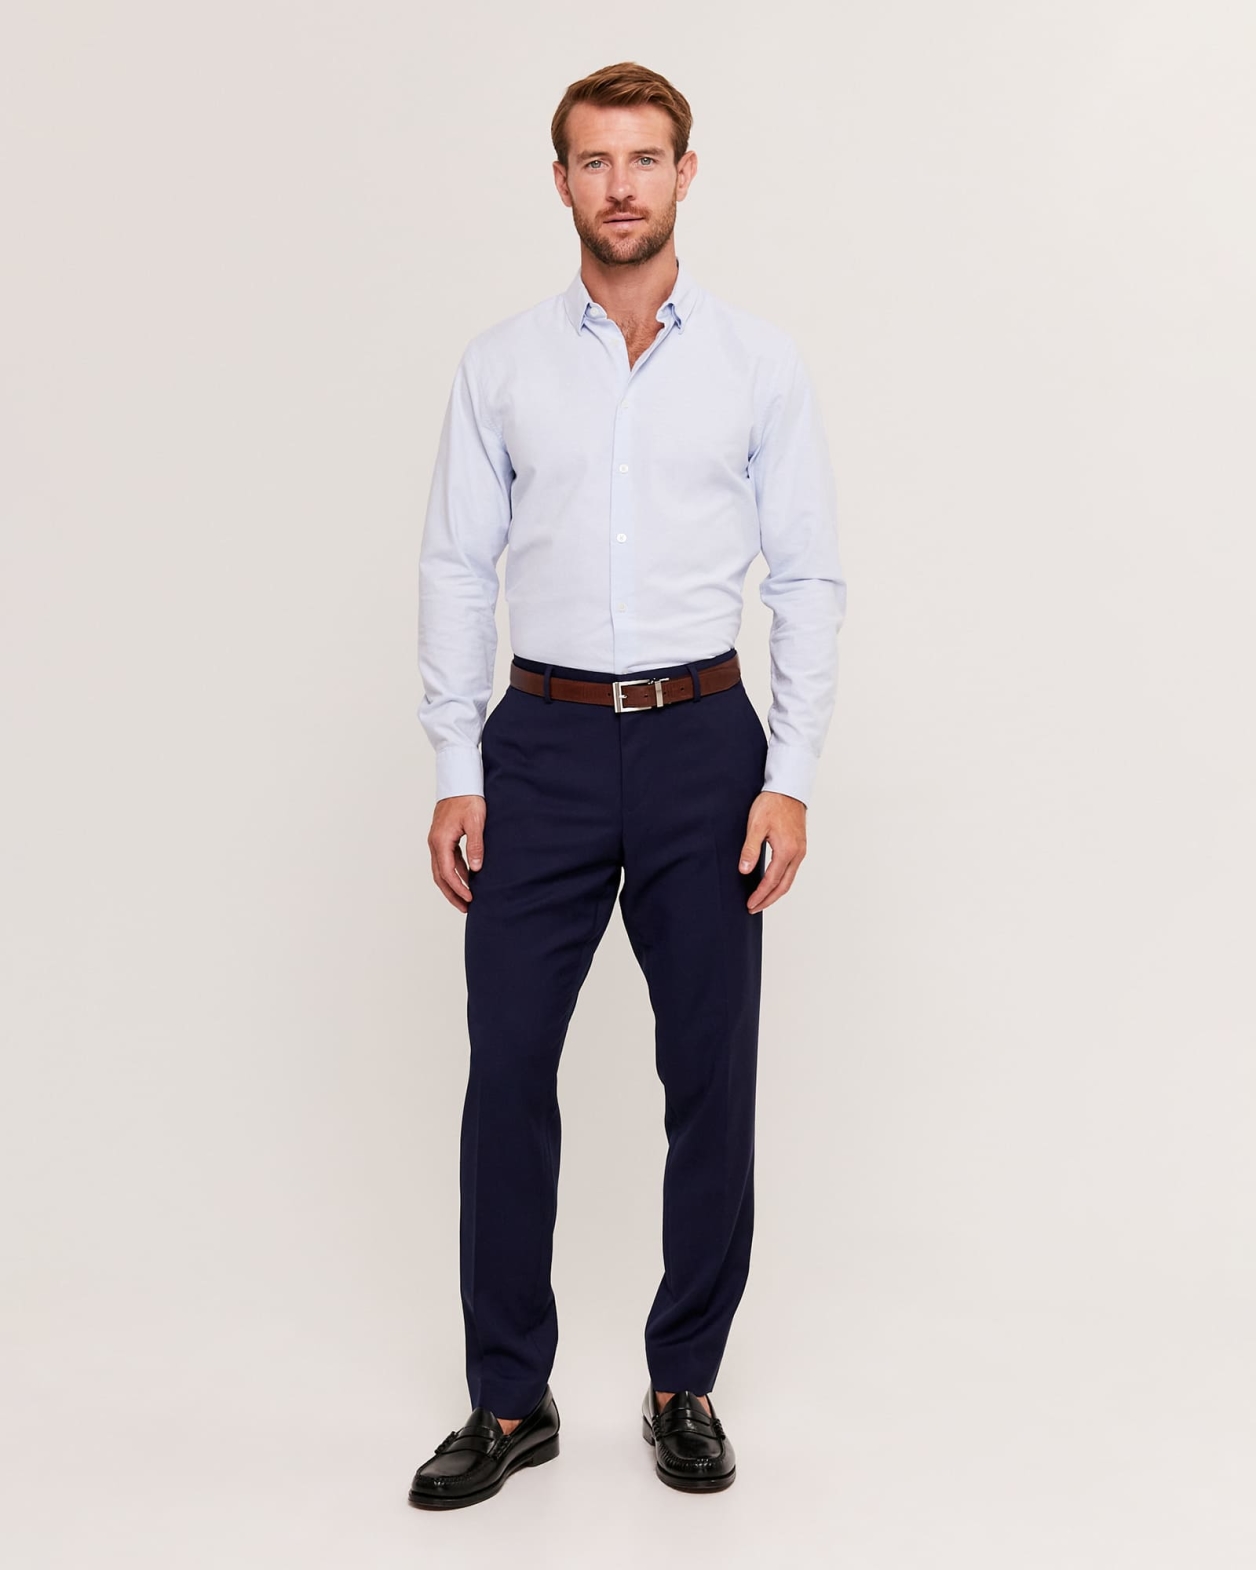 Christopher Oxford Long Sleeve Classic Shirt in SKY